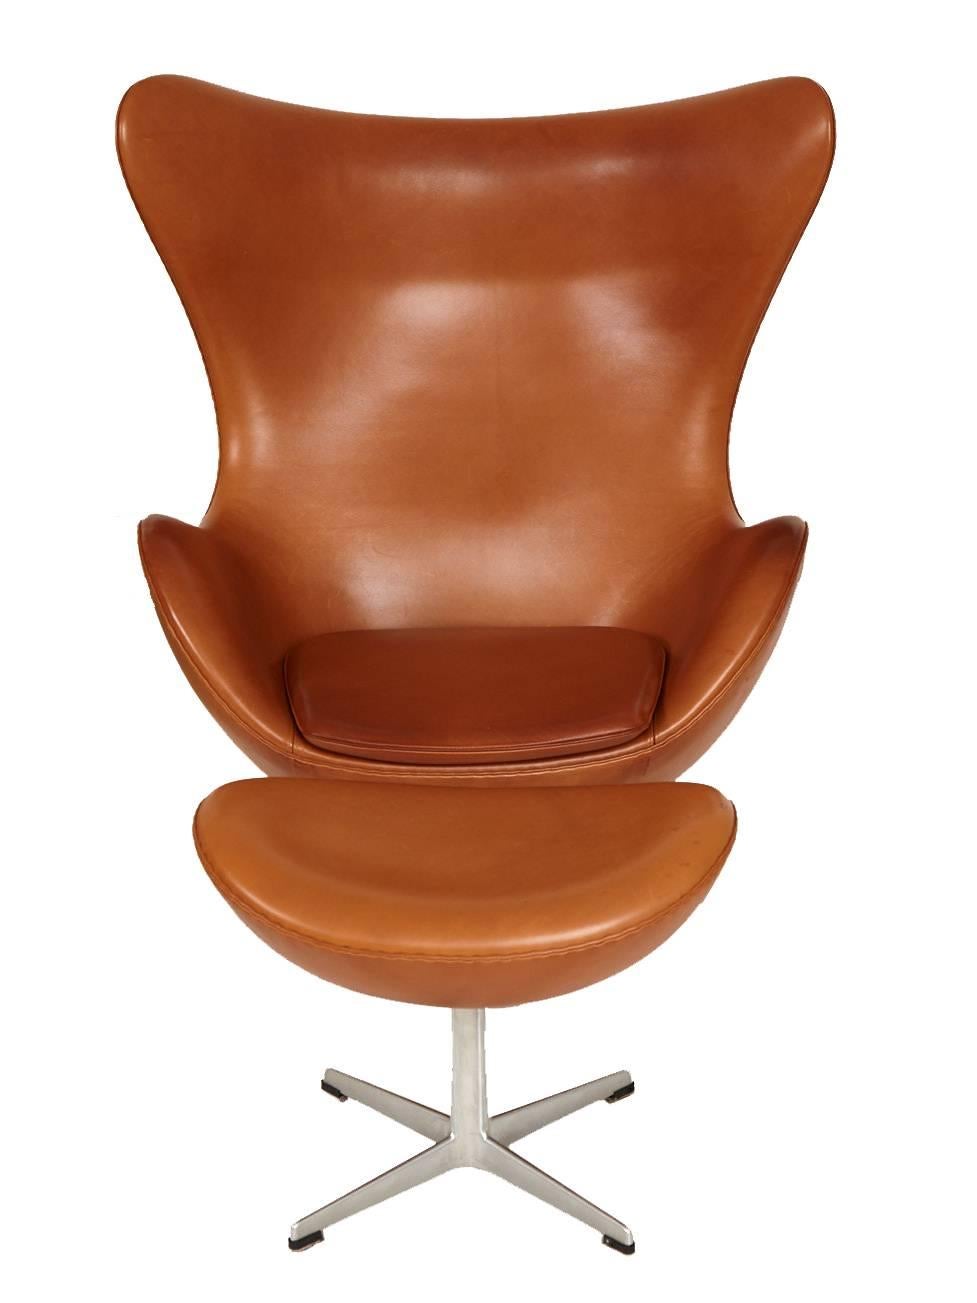 Arne Jacobsen leather Egg chair and ottoman circa 1990s in beautiful lightly patinated condition complete with Tilt Swivel mechanism for Fritz Hansen.

In 1958, Arne Jacobsen designed the Egg for the lobby and reception areas of the Royal Hotel in